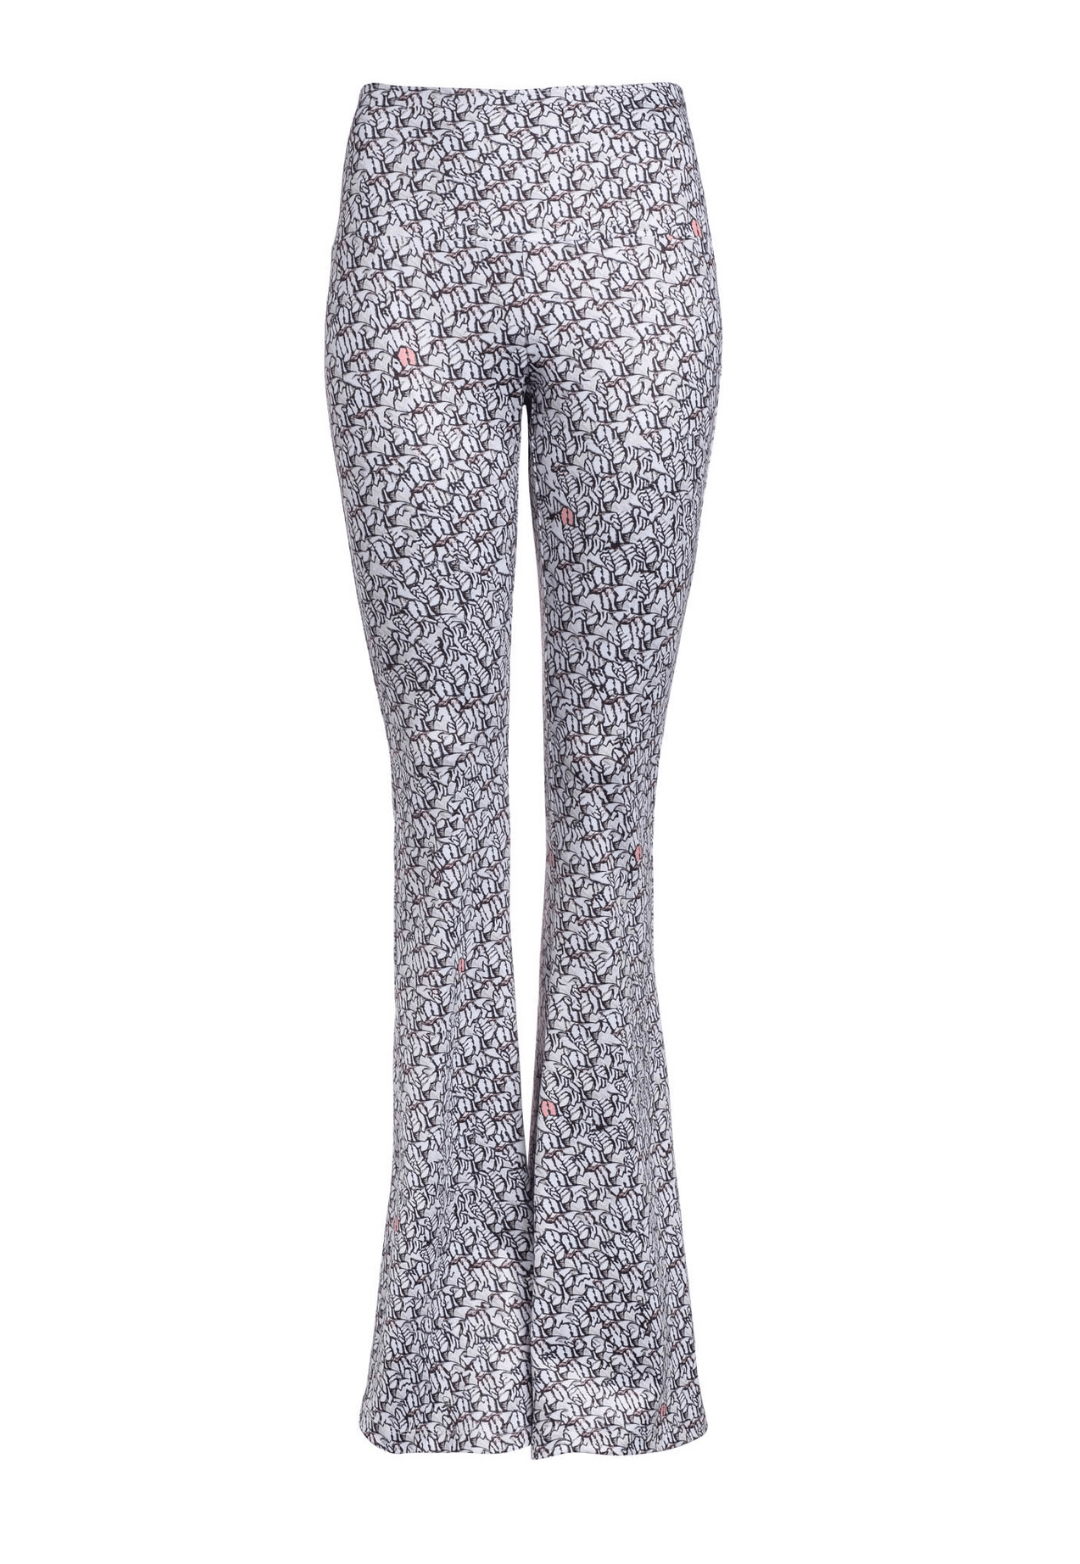 black and white stretch knit pants